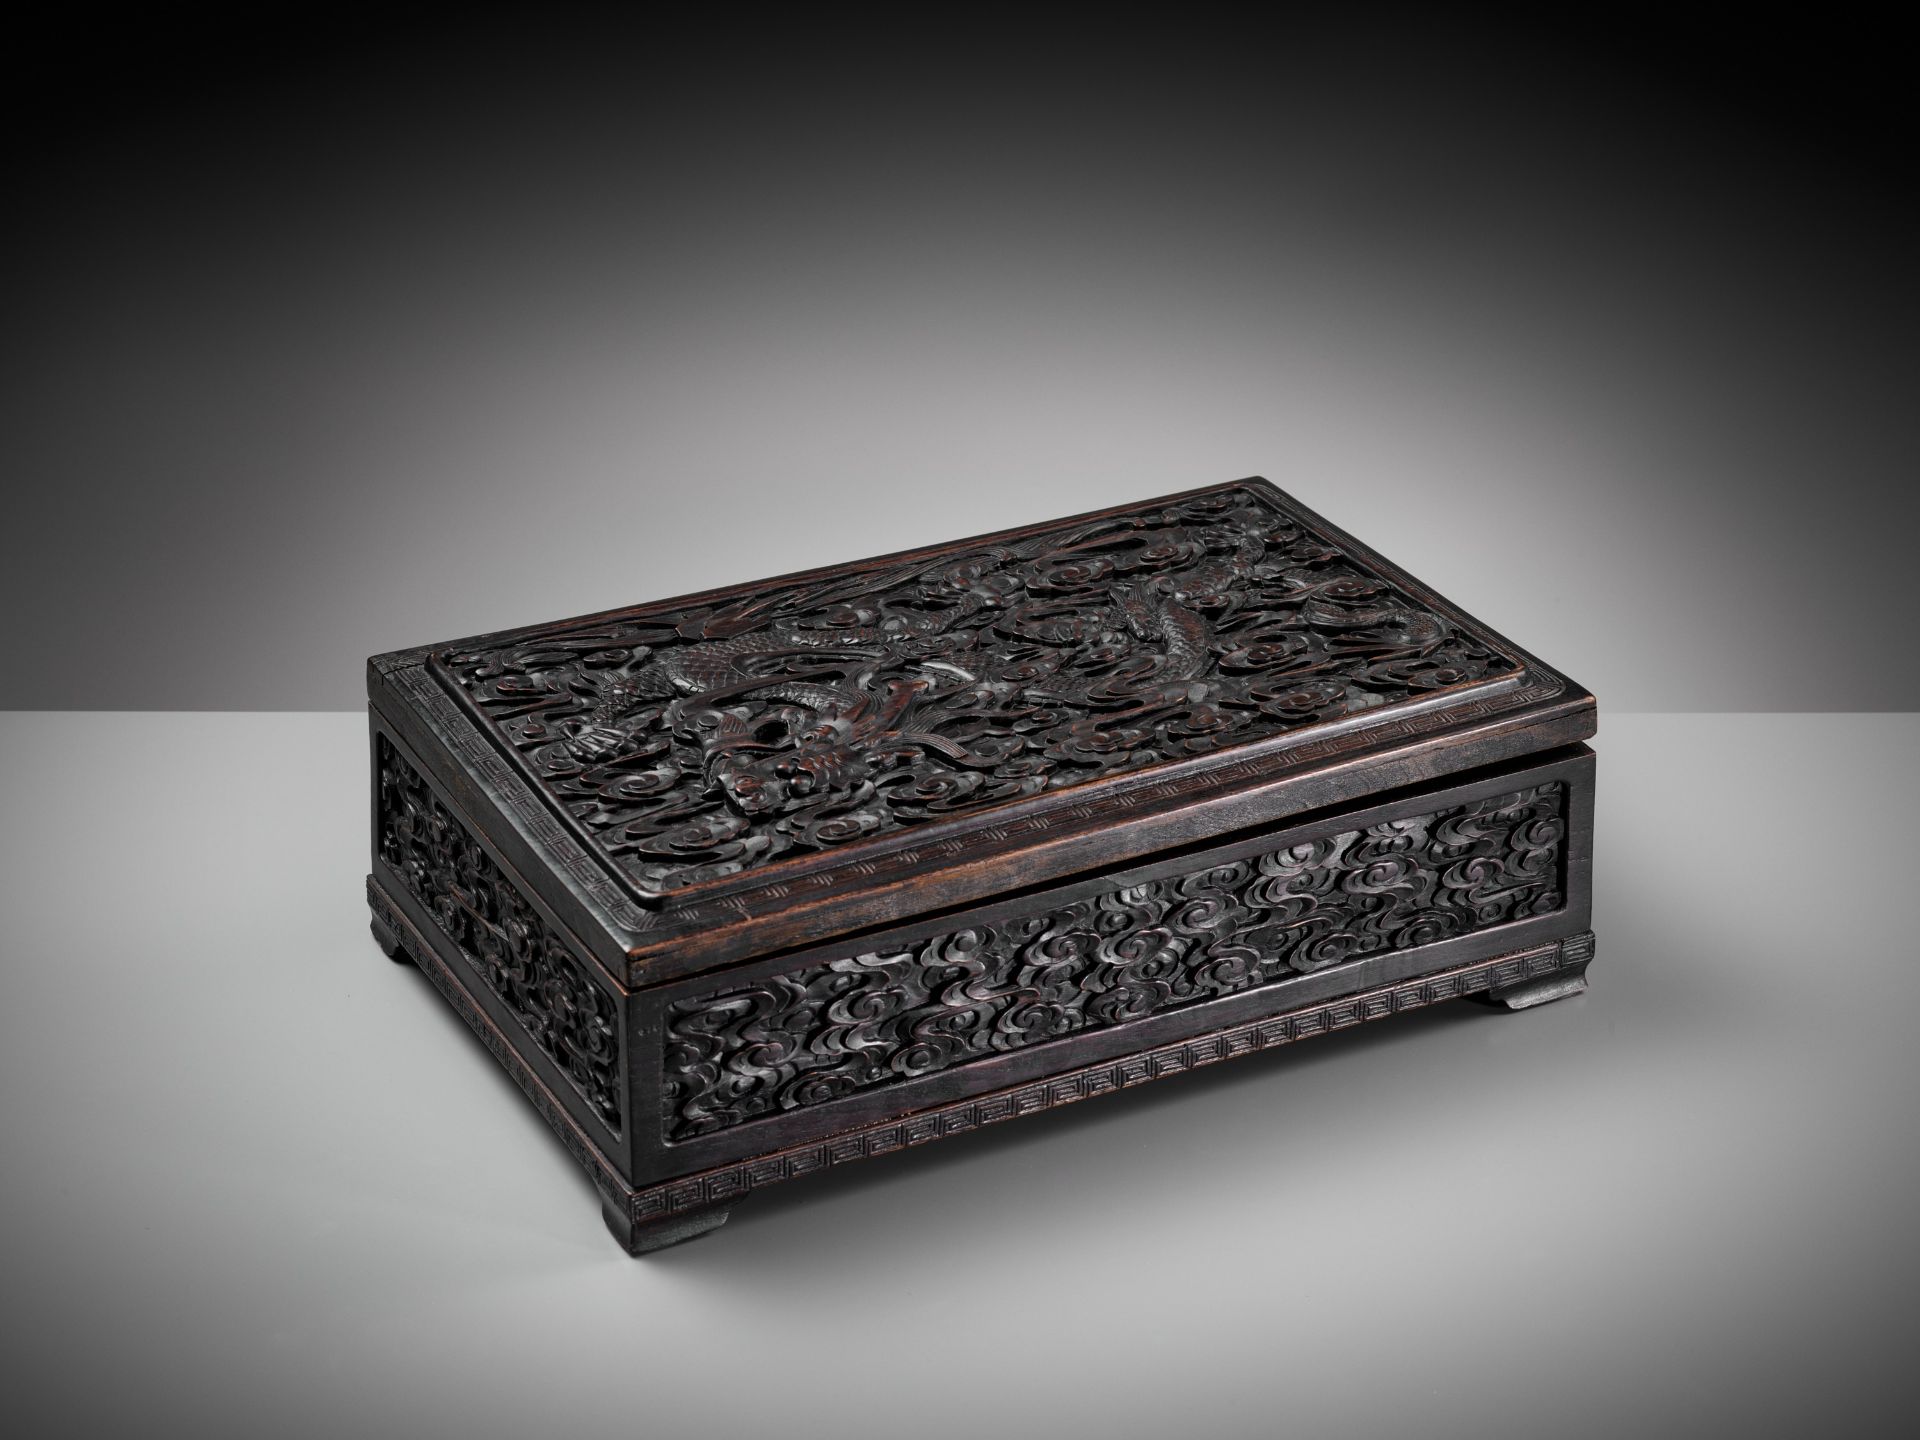 AN IMPERIAL 'DRAGON' HARDWOOD CHEST, COMMEMORATING THE RENOVATION OF THE JADE PEAK PAGODA BY EMPEROR